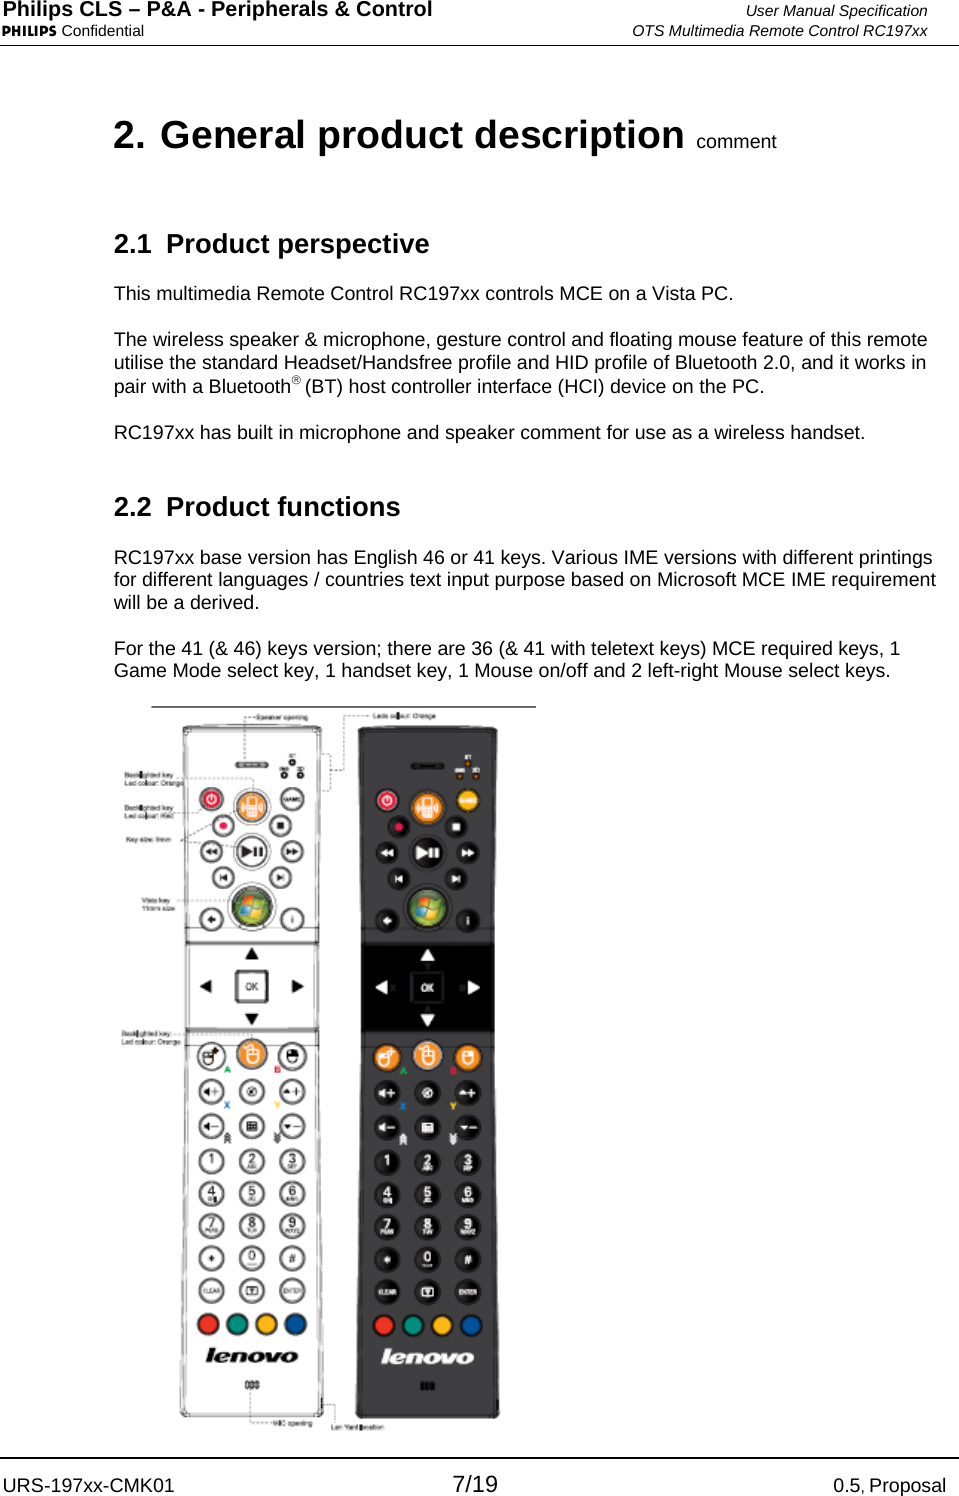 Philips CLS – P&amp;A - Peripherals &amp; Control  User Manual Specification PHILIPS Confidential  OTS Multimedia Remote Control RC197xx URS-197xx-CMK01 7/19 0.5, Proposal 2. General product description comment 2.1 Product perspective This multimedia Remote Control RC197xx controls MCE on a Vista PC.  The wireless speaker &amp; microphone, gesture control and floating mouse feature of this remote utilise the standard Headset/Handsfree profile and HID profile of Bluetooth 2.0, and it works in pair with a Bluetooth® (BT) host controller interface (HCI) device on the PC.  RC197xx has built in microphone and speaker comment for use as a wireless handset. 2.2 Product functions RC197xx base version has English 46 or 41 keys. Various IME versions with different printings for different languages / countries text input purpose based on Microsoft MCE IME requirement will be a derived.  For the 41 (&amp; 46) keys version; there are 36 (&amp; 41 with teletext keys) MCE required keys, 1 Game Mode select key, 1 handset key, 1 Mouse on/off and 2 left-right Mouse select keys.  